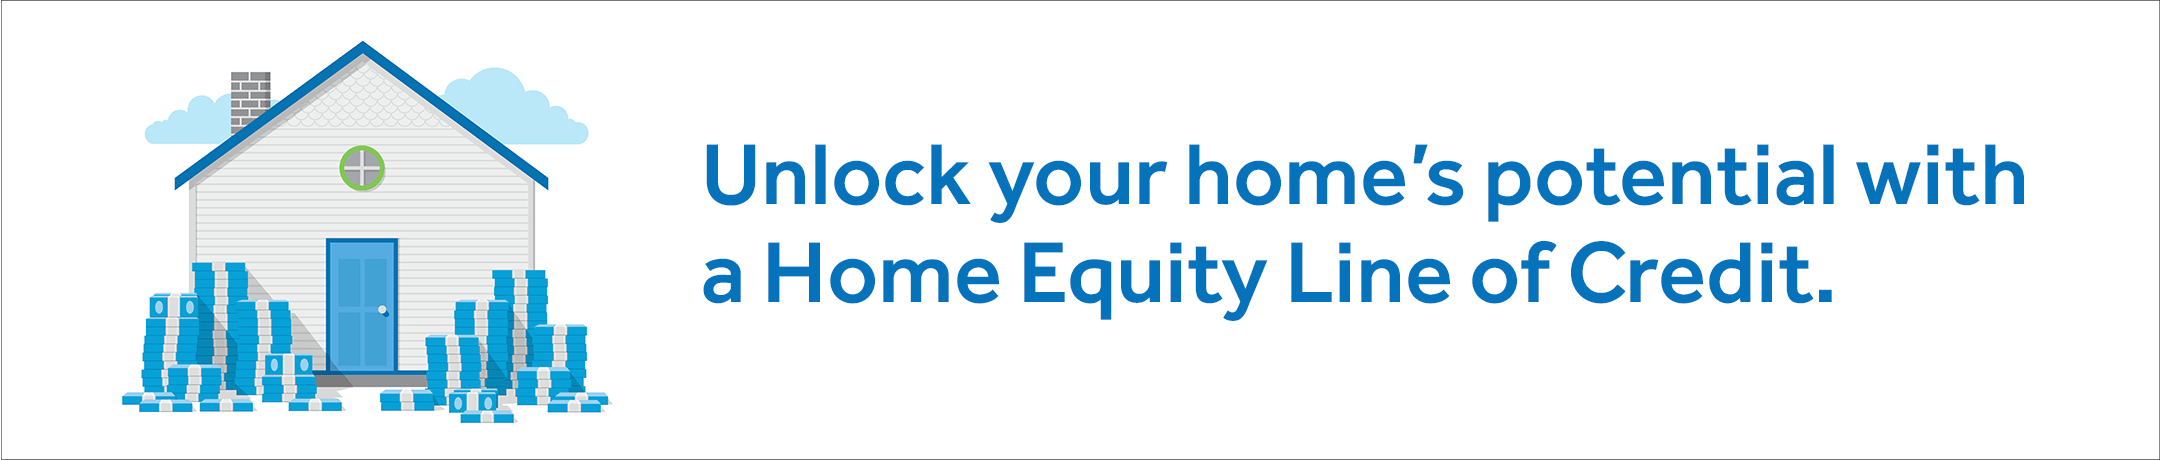 Unlock your home's potential with a Home Equity Line of Credit.